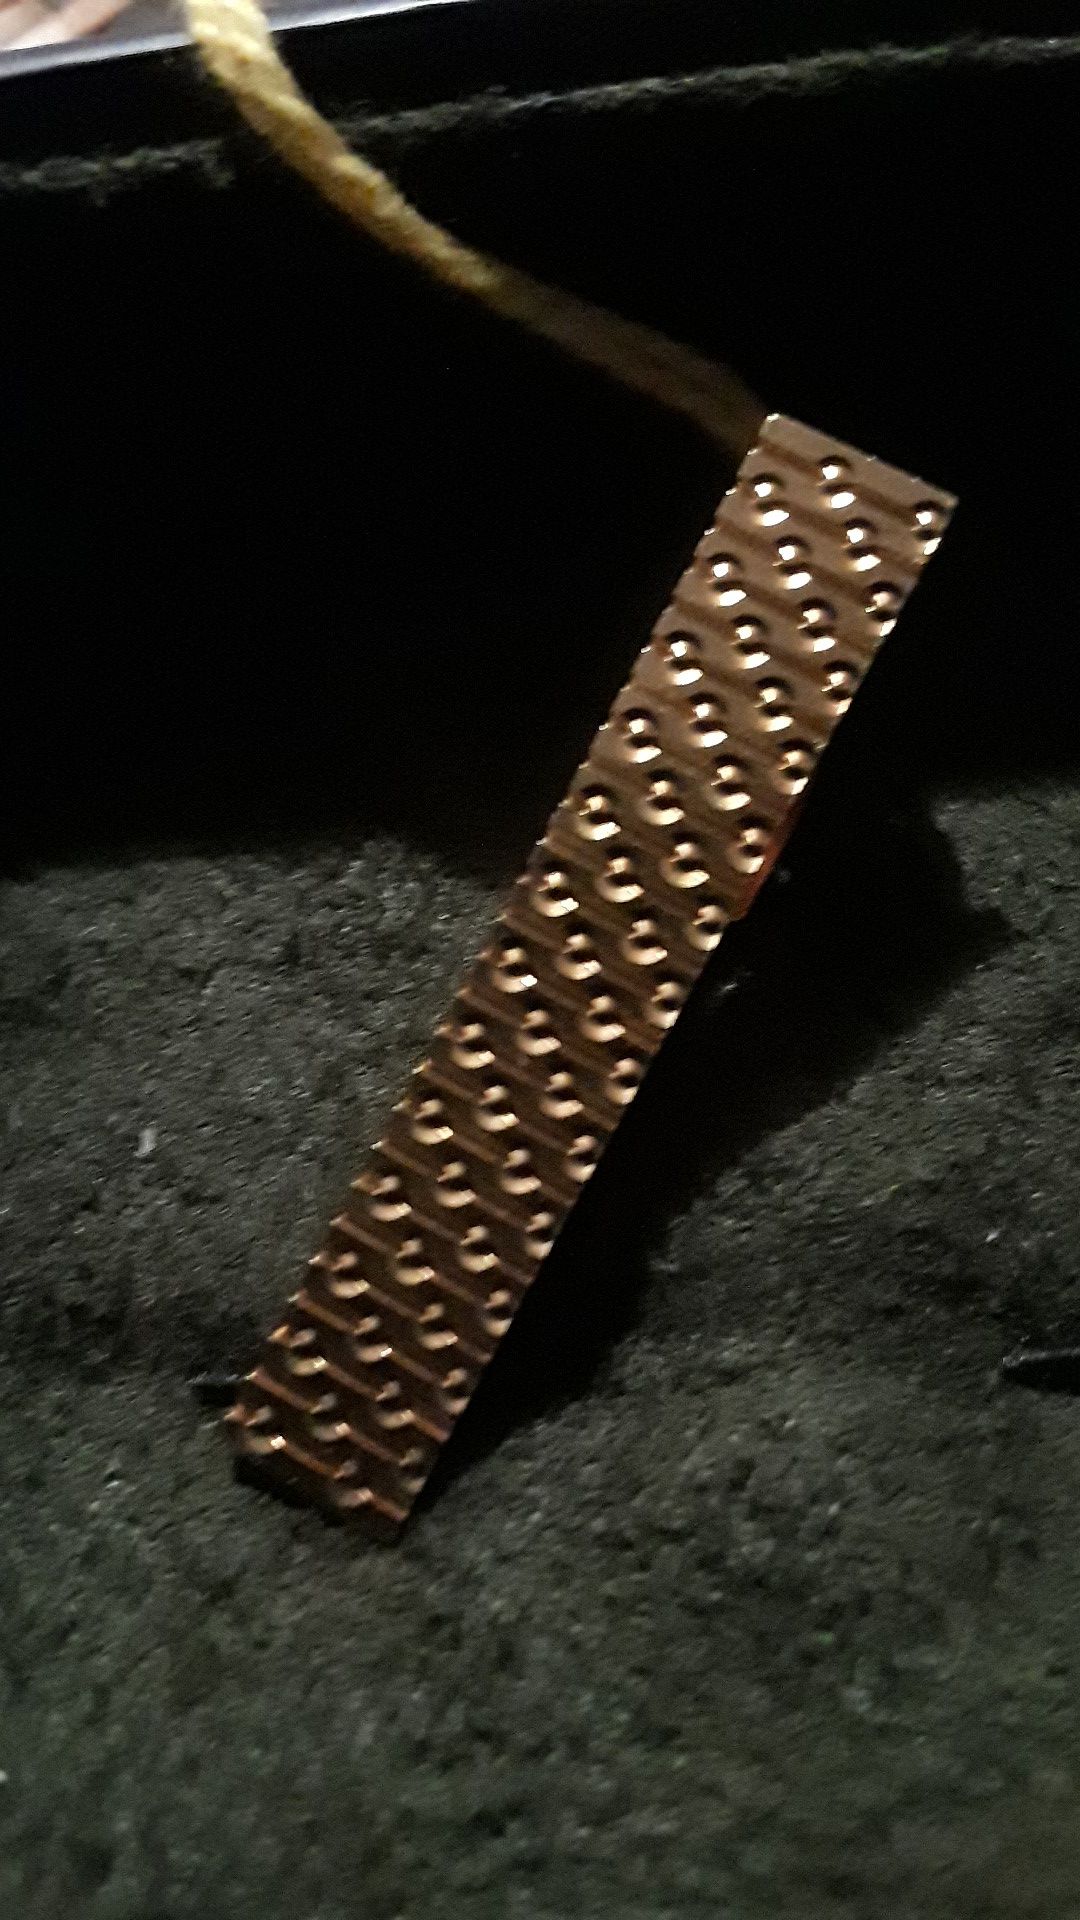 Absolutely Gorgeous Italian Designer's ETRO MILANO tie pin. Made in Italy.